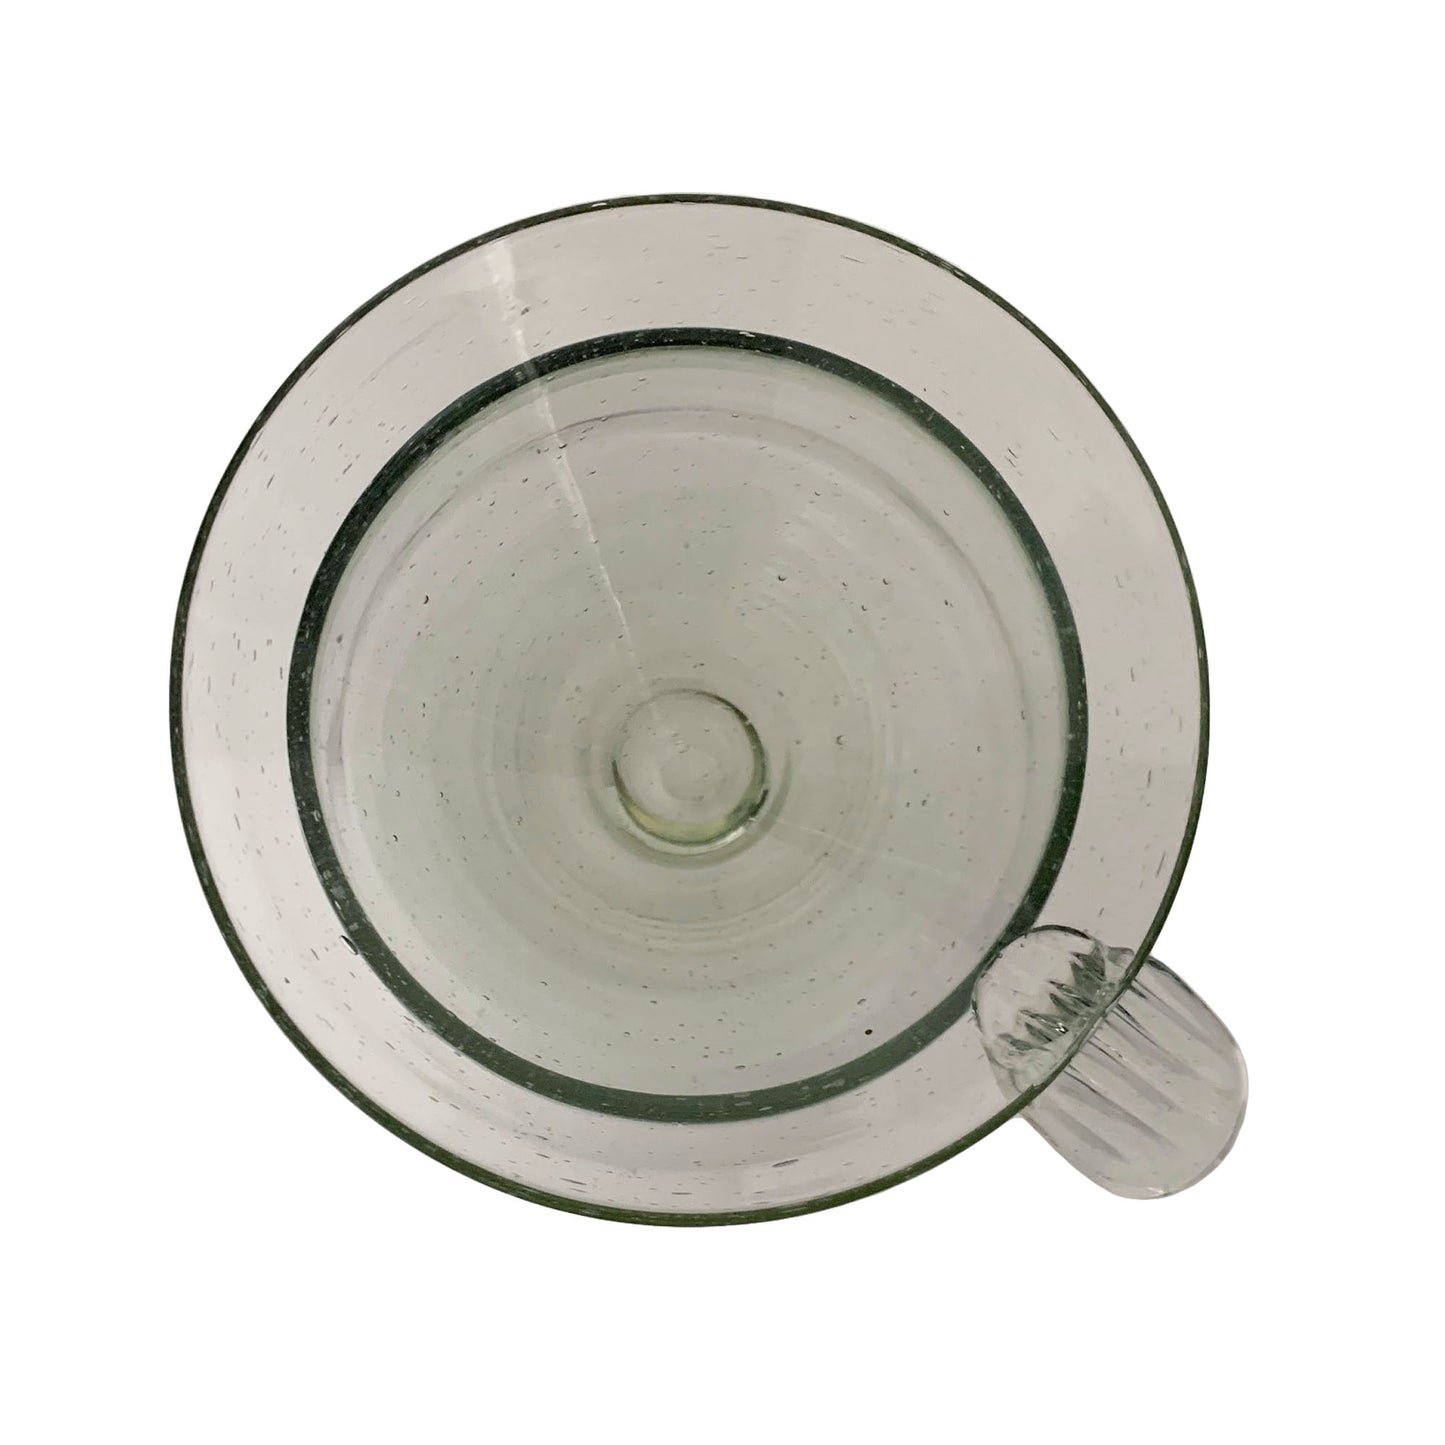 Hand Blown Martini | Margarita Glass (or Ceviche dish) with Cooler- Hand Made in Guatemala with Recycled Glass *This listing is for one set*